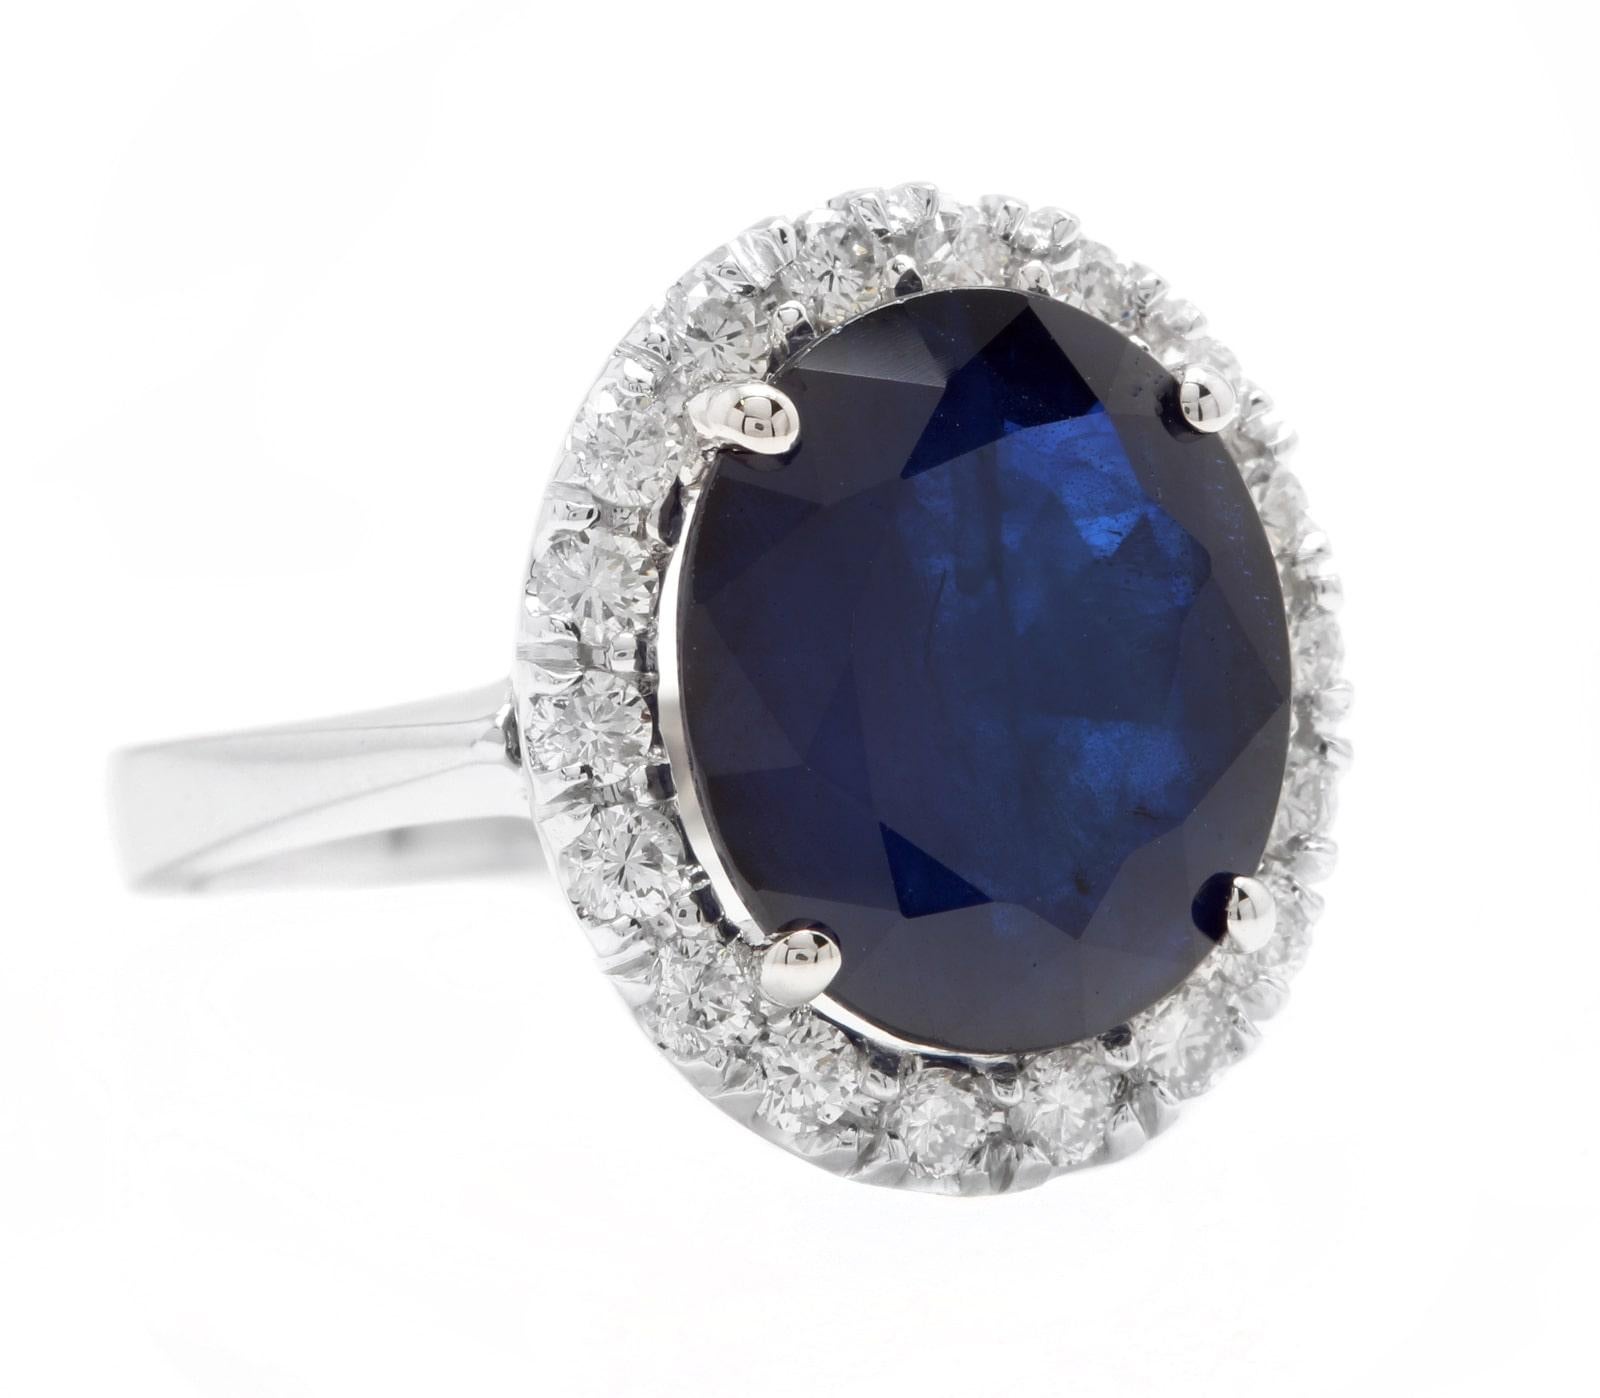 11.15 Carats Exquisite Natural Blue Sapphire and Diamond 14K Solid White Gold Ring

Suggested Replacement Value Approx. $6,500.00

Total Blue Sapphire Weight is: Approx. 10.00 Carats 

Sapphire Measures: Approx. 14.00 x 12.00mm

Sapphire Treatment: